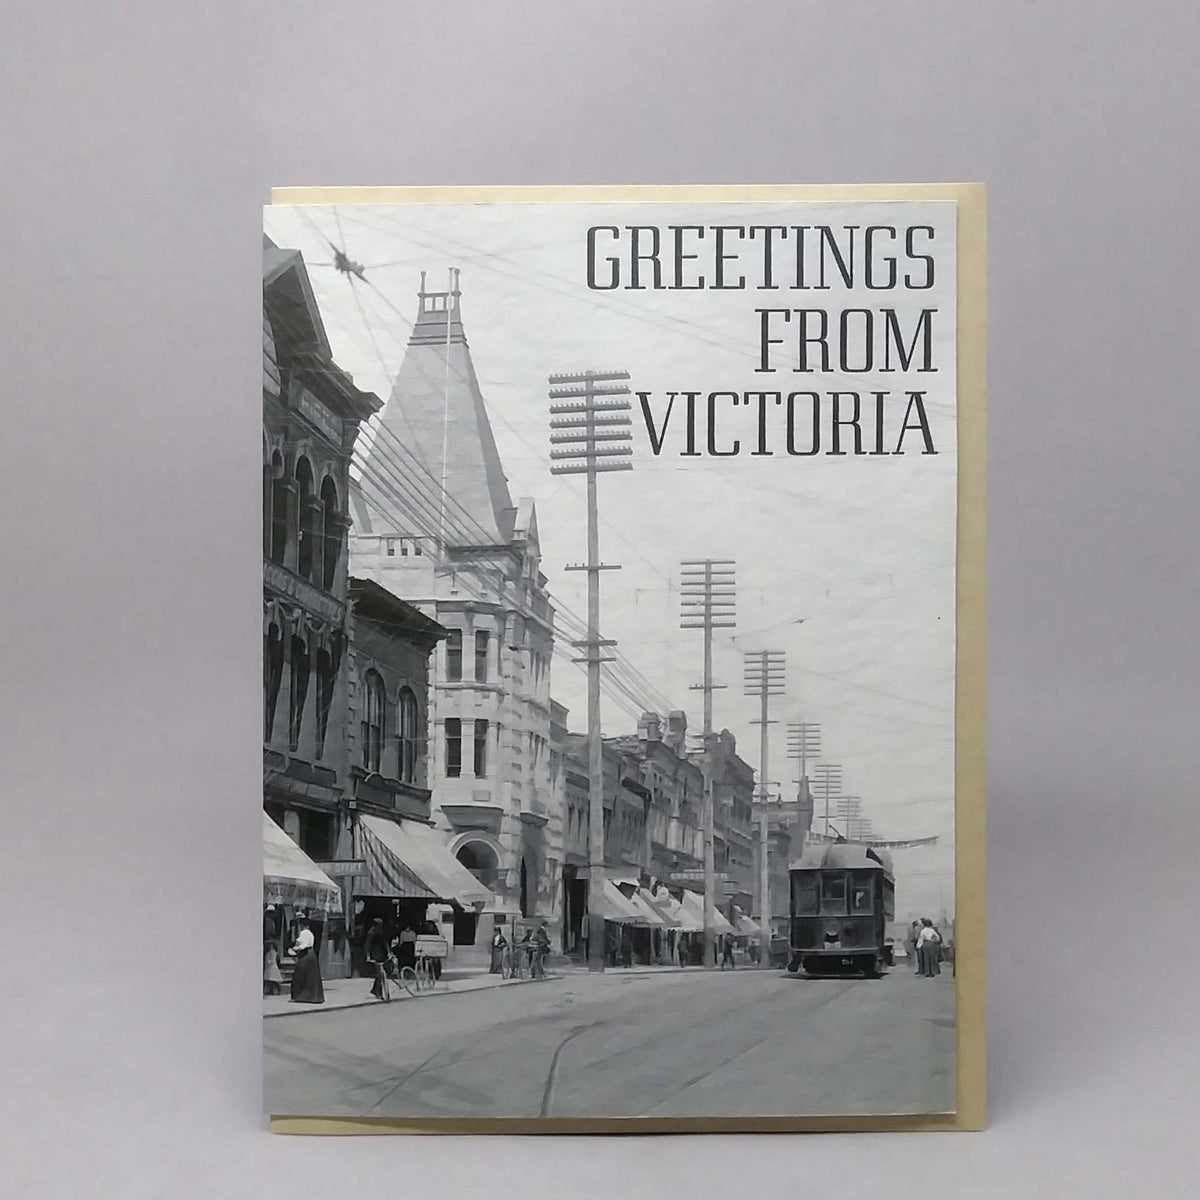 Greetings from Victoria - Vintage